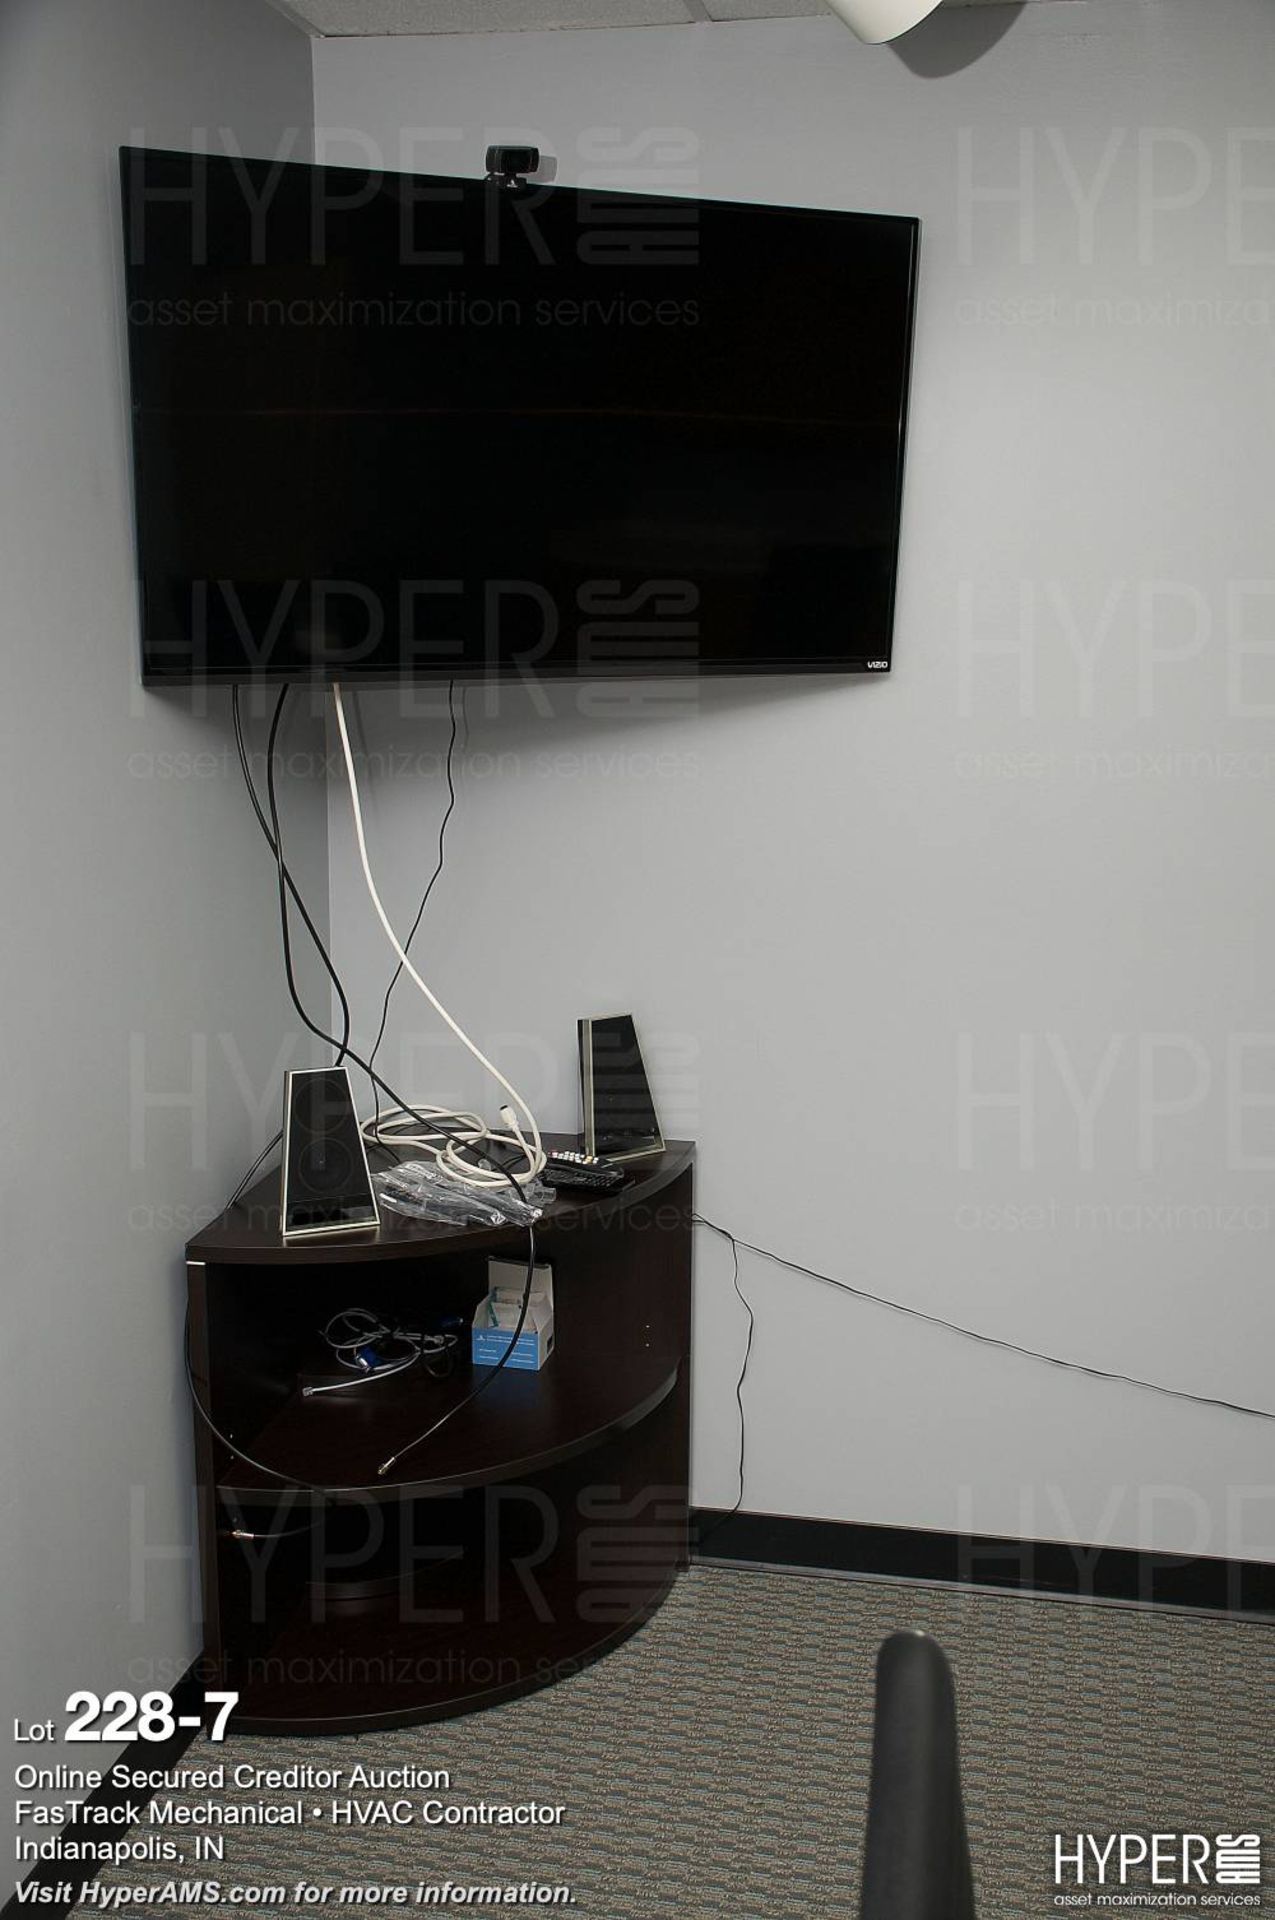 Conference room furniture - Image 4 of 4